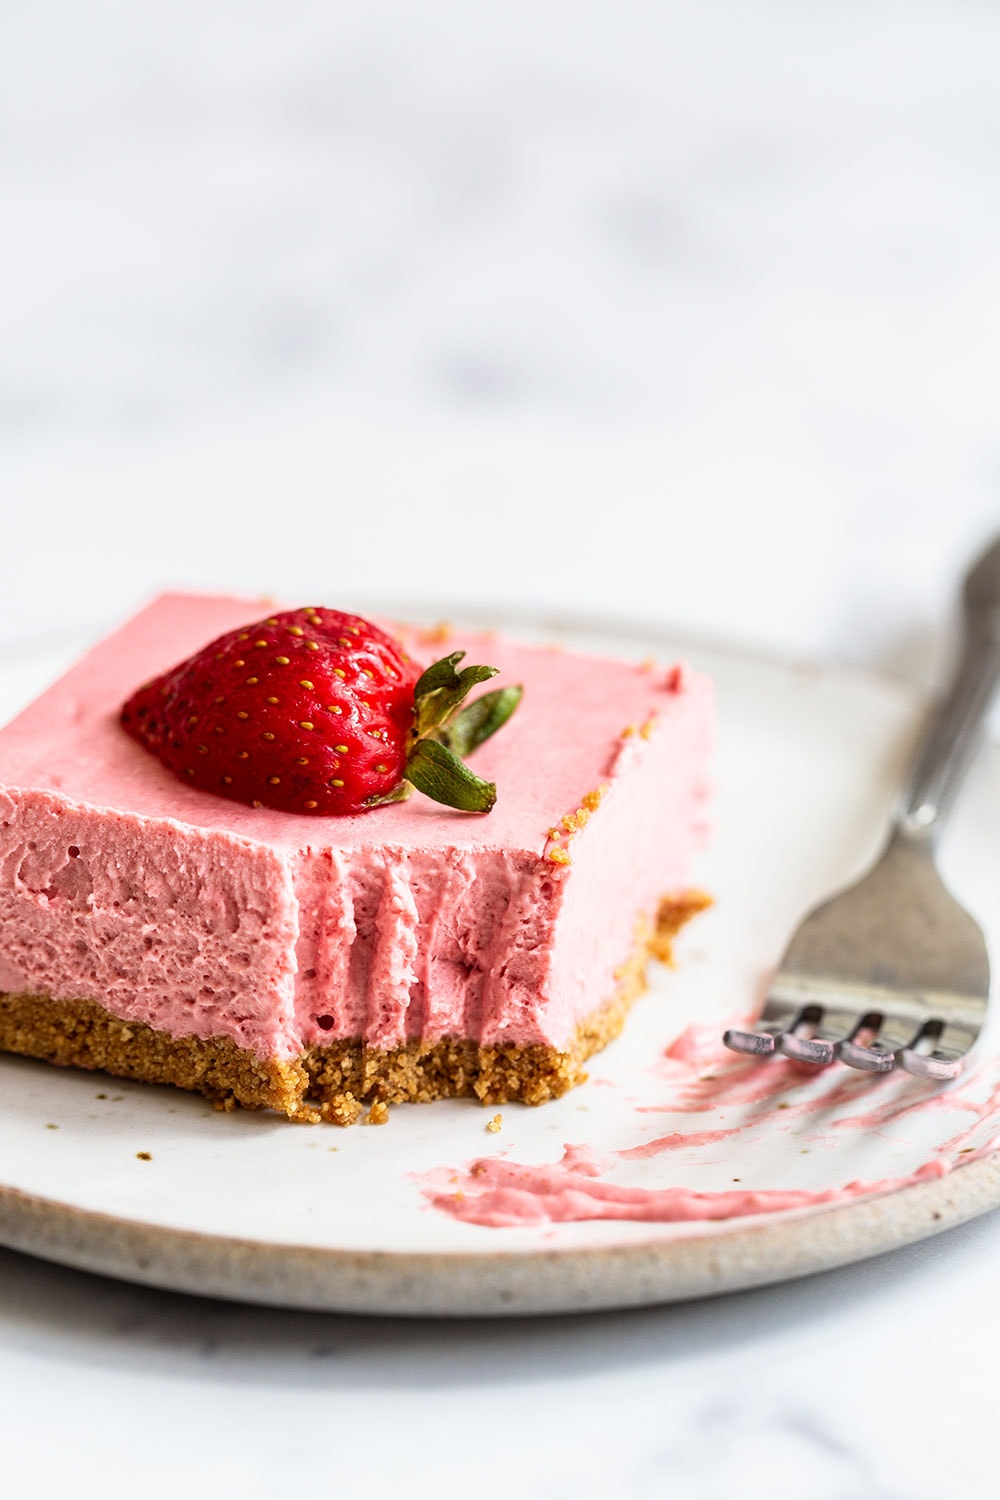 Homemade no bake strawberry cheesecake bar on a plate with a sliced strawberry on top, ready to serve at a summer BBQ!